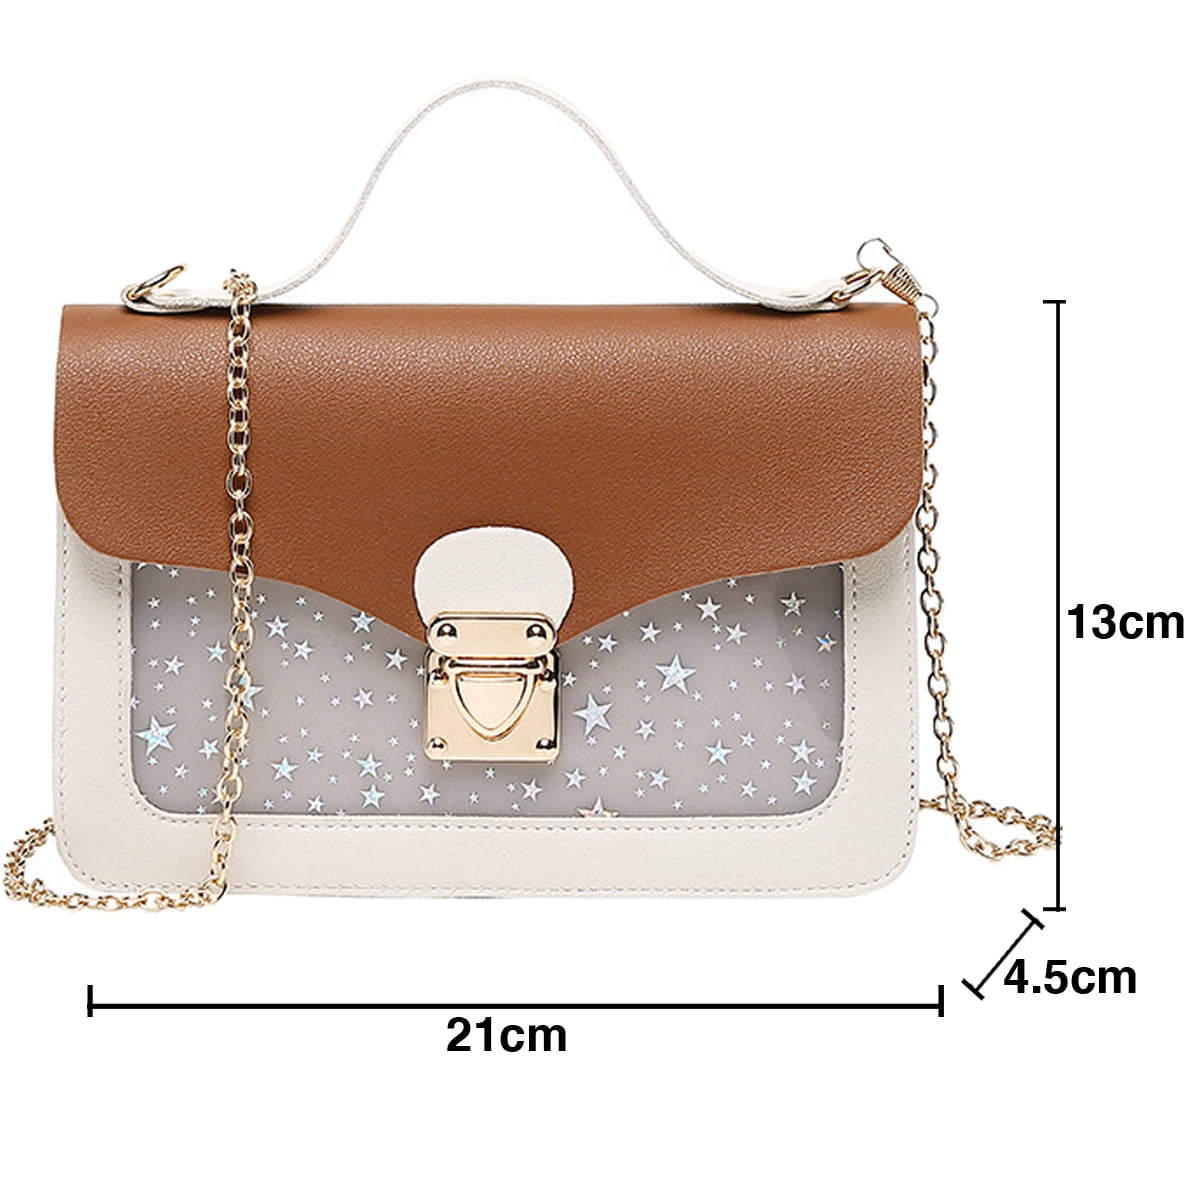 Bag Strap Bagss Sale Shoulder Straps For Set Designers Bags Women Crossbody  Lady Strapss More Color Coin Purse From Ssw007, $13.33